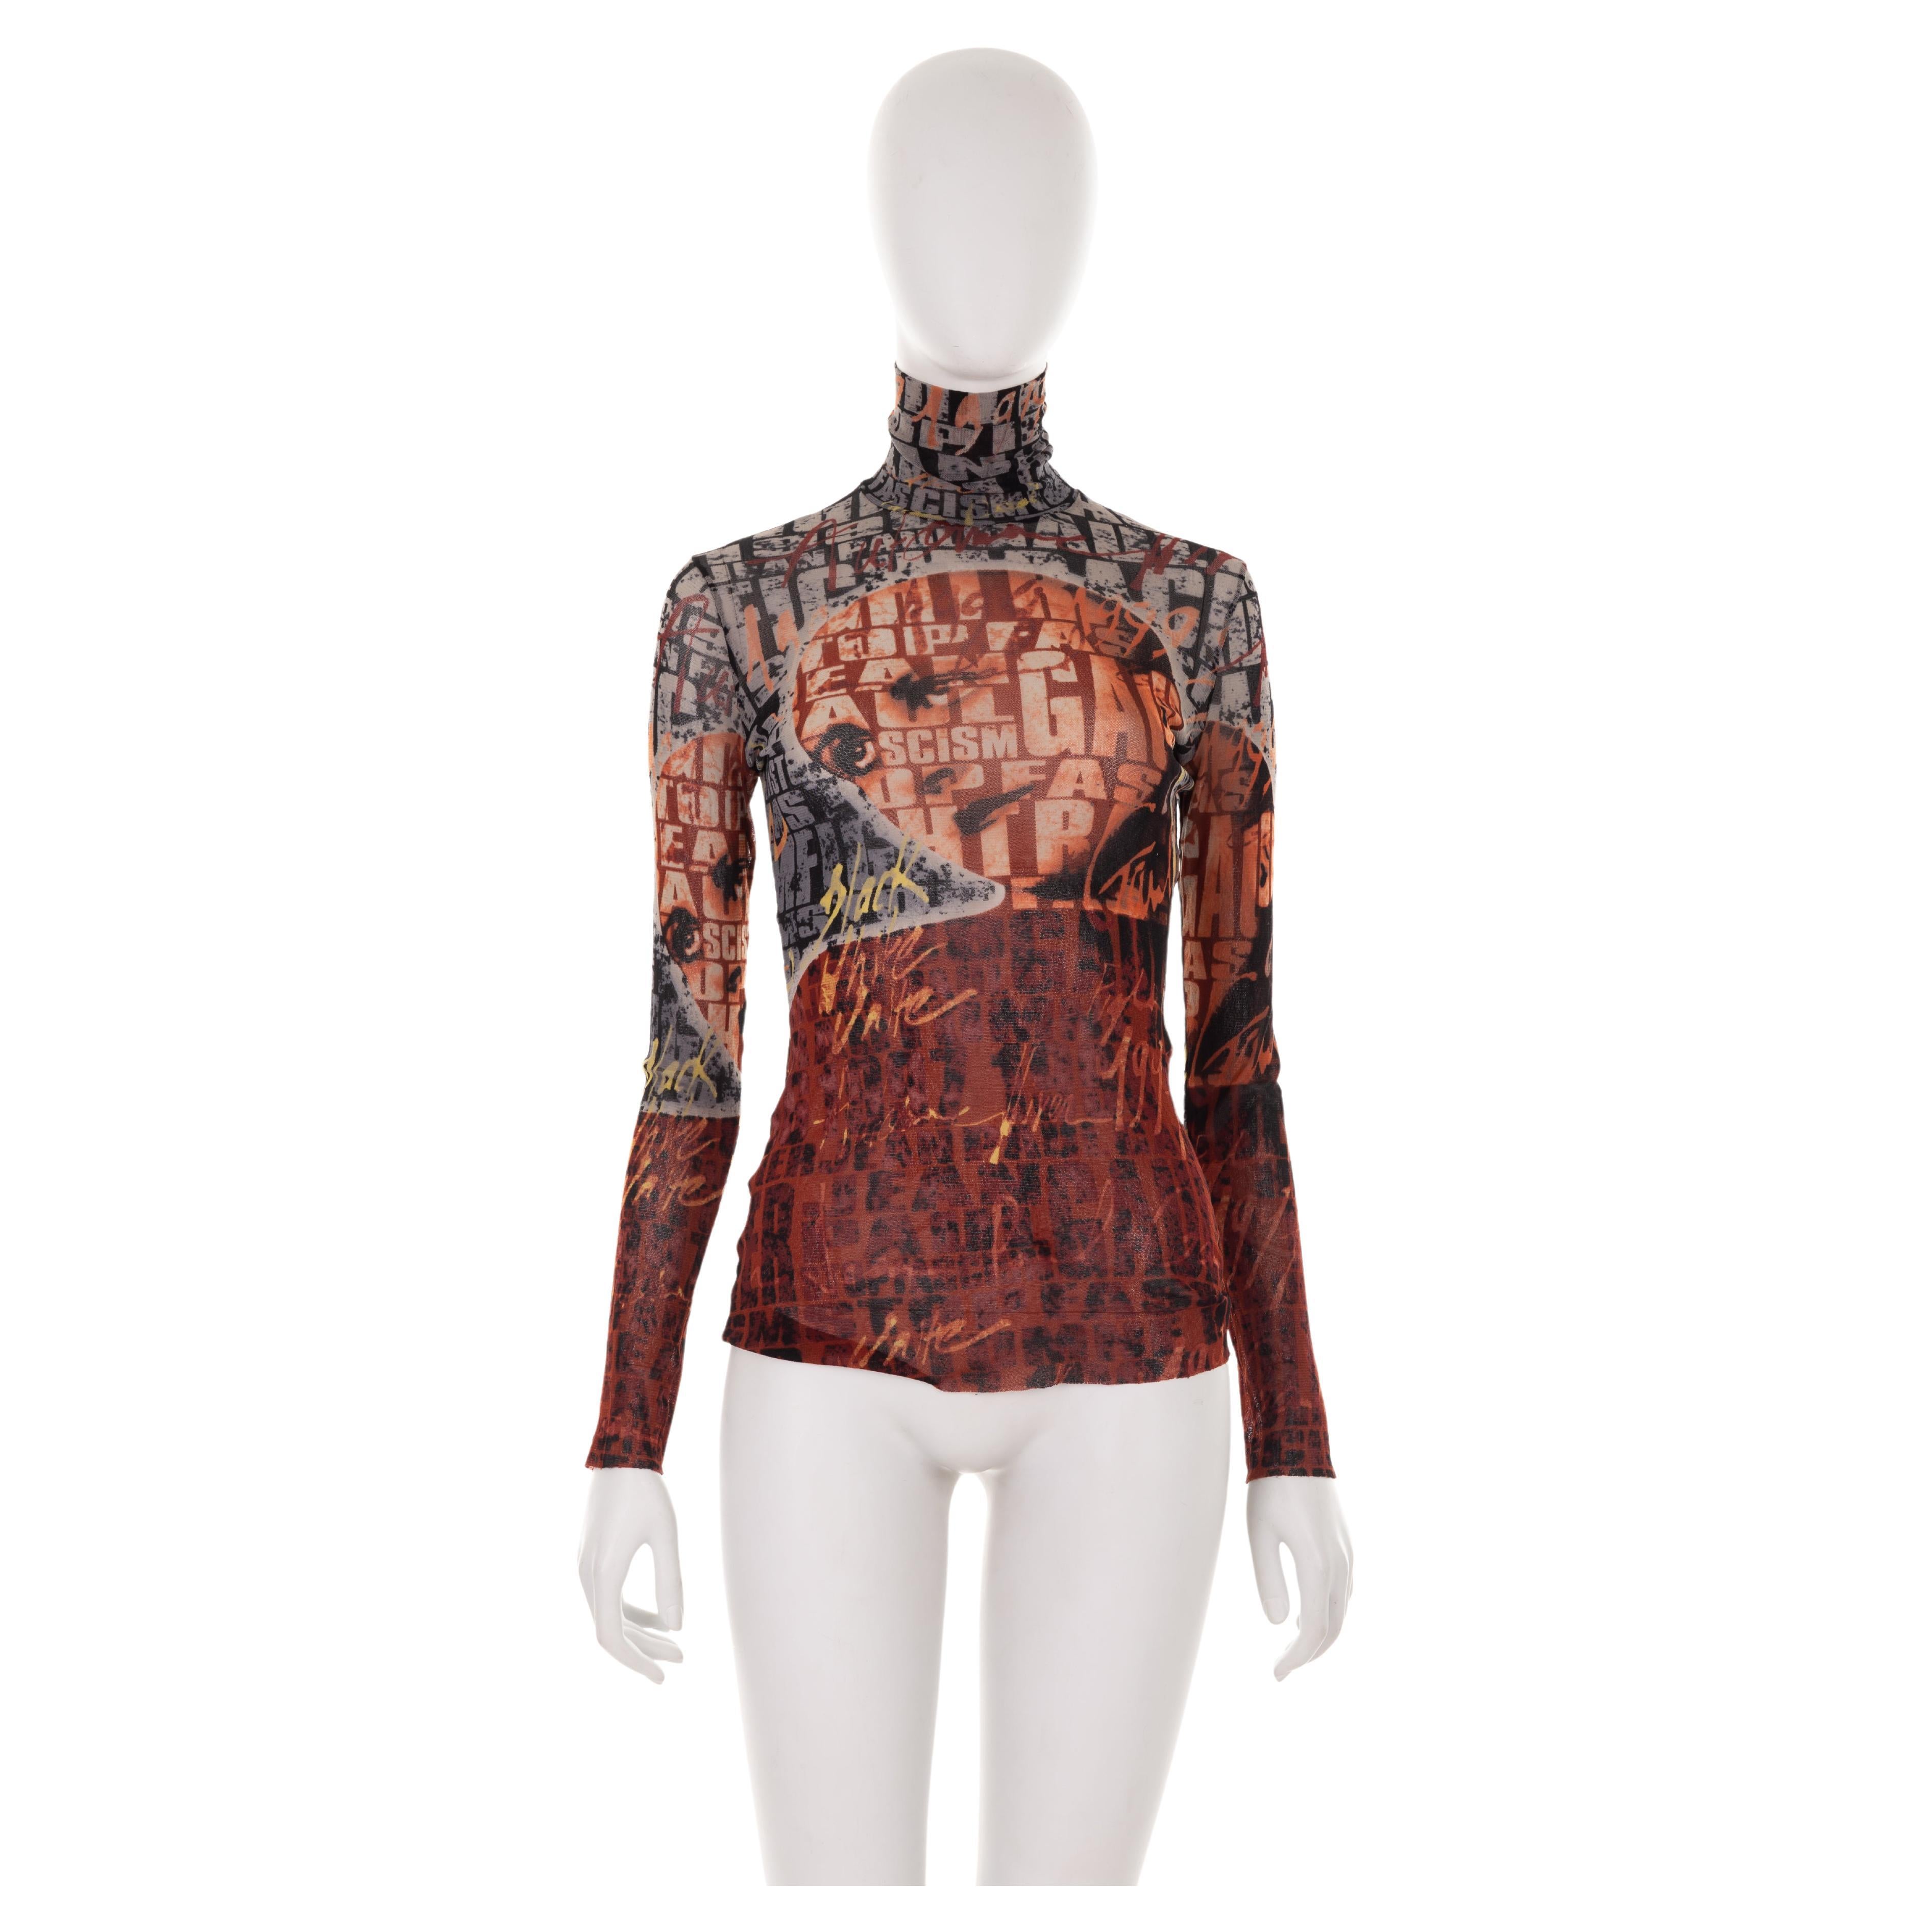 - Jean Paul Gaultier Fall Winter 1997 collection
- Sold by Gold Palms Vintage
- Printed mesh turtleneck top
- Long sleeve
- Portrait print with “Fight Racism” slogan
- Brown/red with grey, yellow, black hues
- Size: M

Shoulder to shoulder: 38 cm/